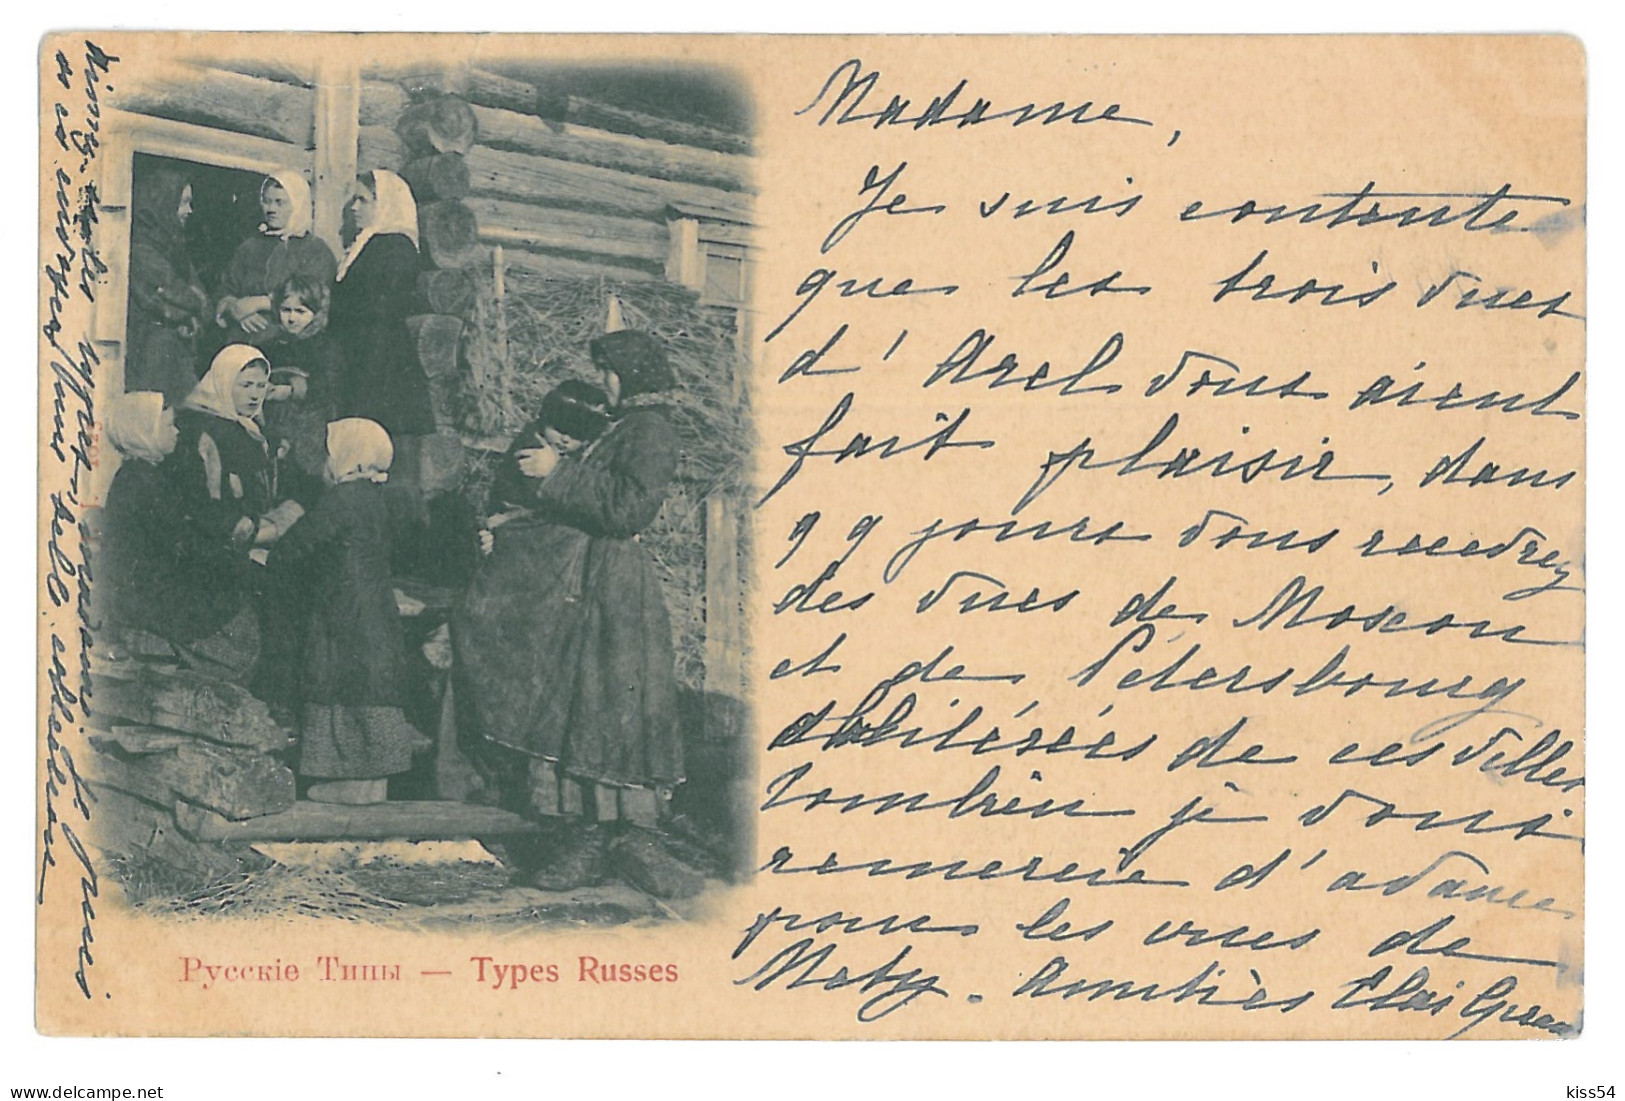 RUS 995 - 15365 ETHNICS From Russia - Old Postcard - Used - 1901 - Russland